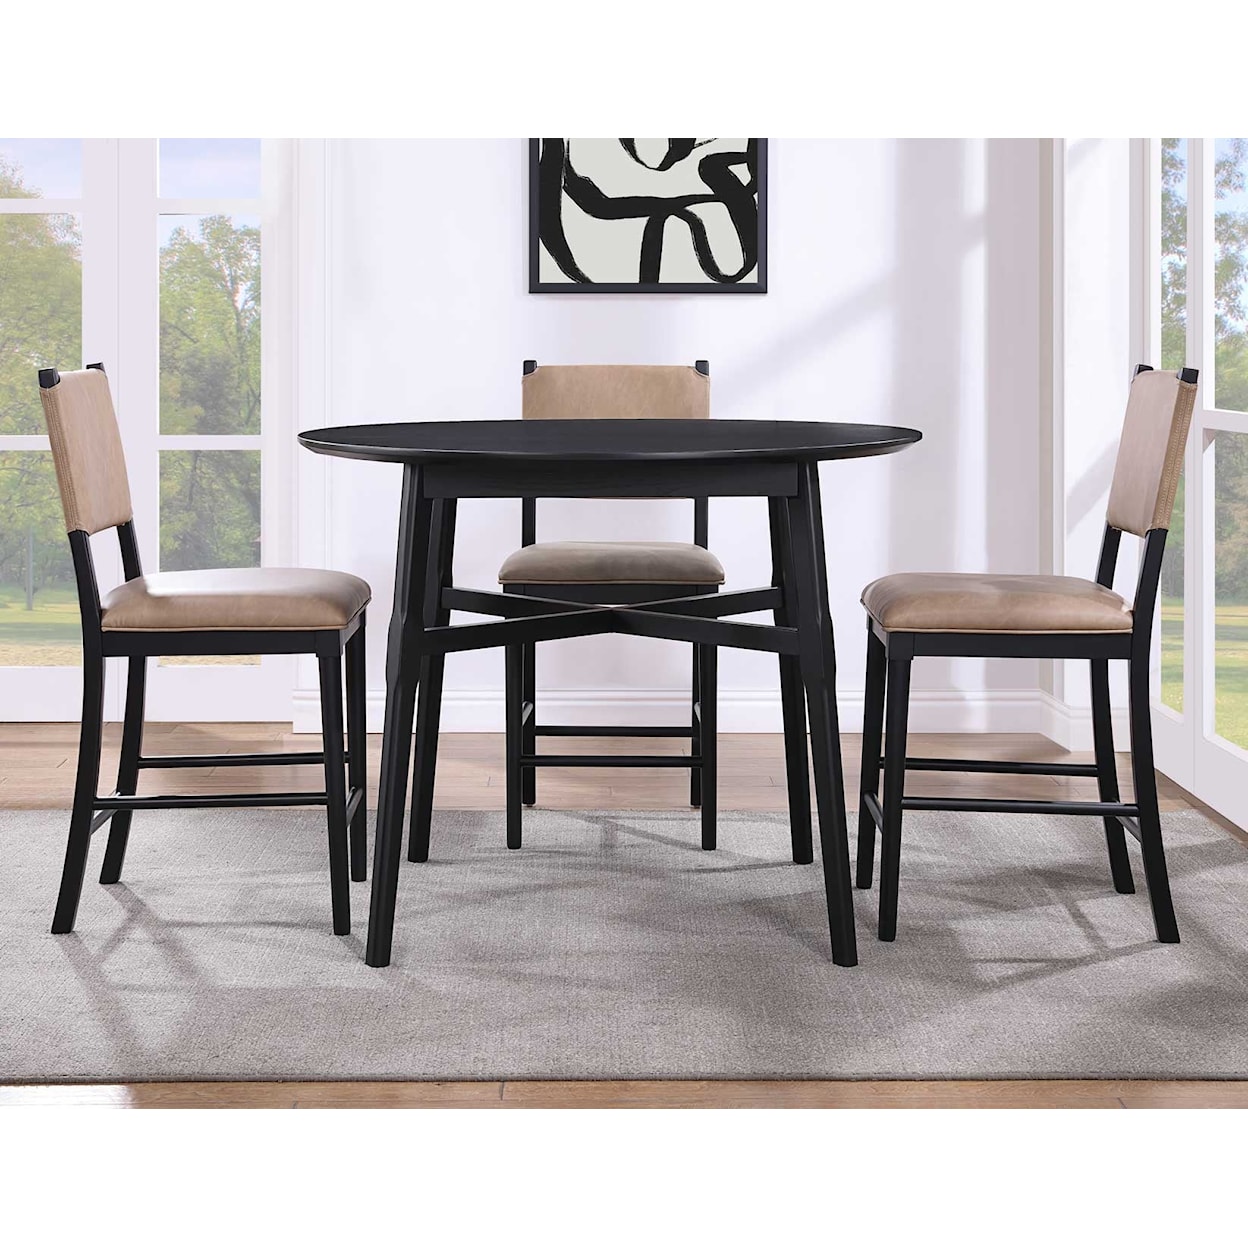 Prime Oslo 4-Piece Counter Height Dining Set